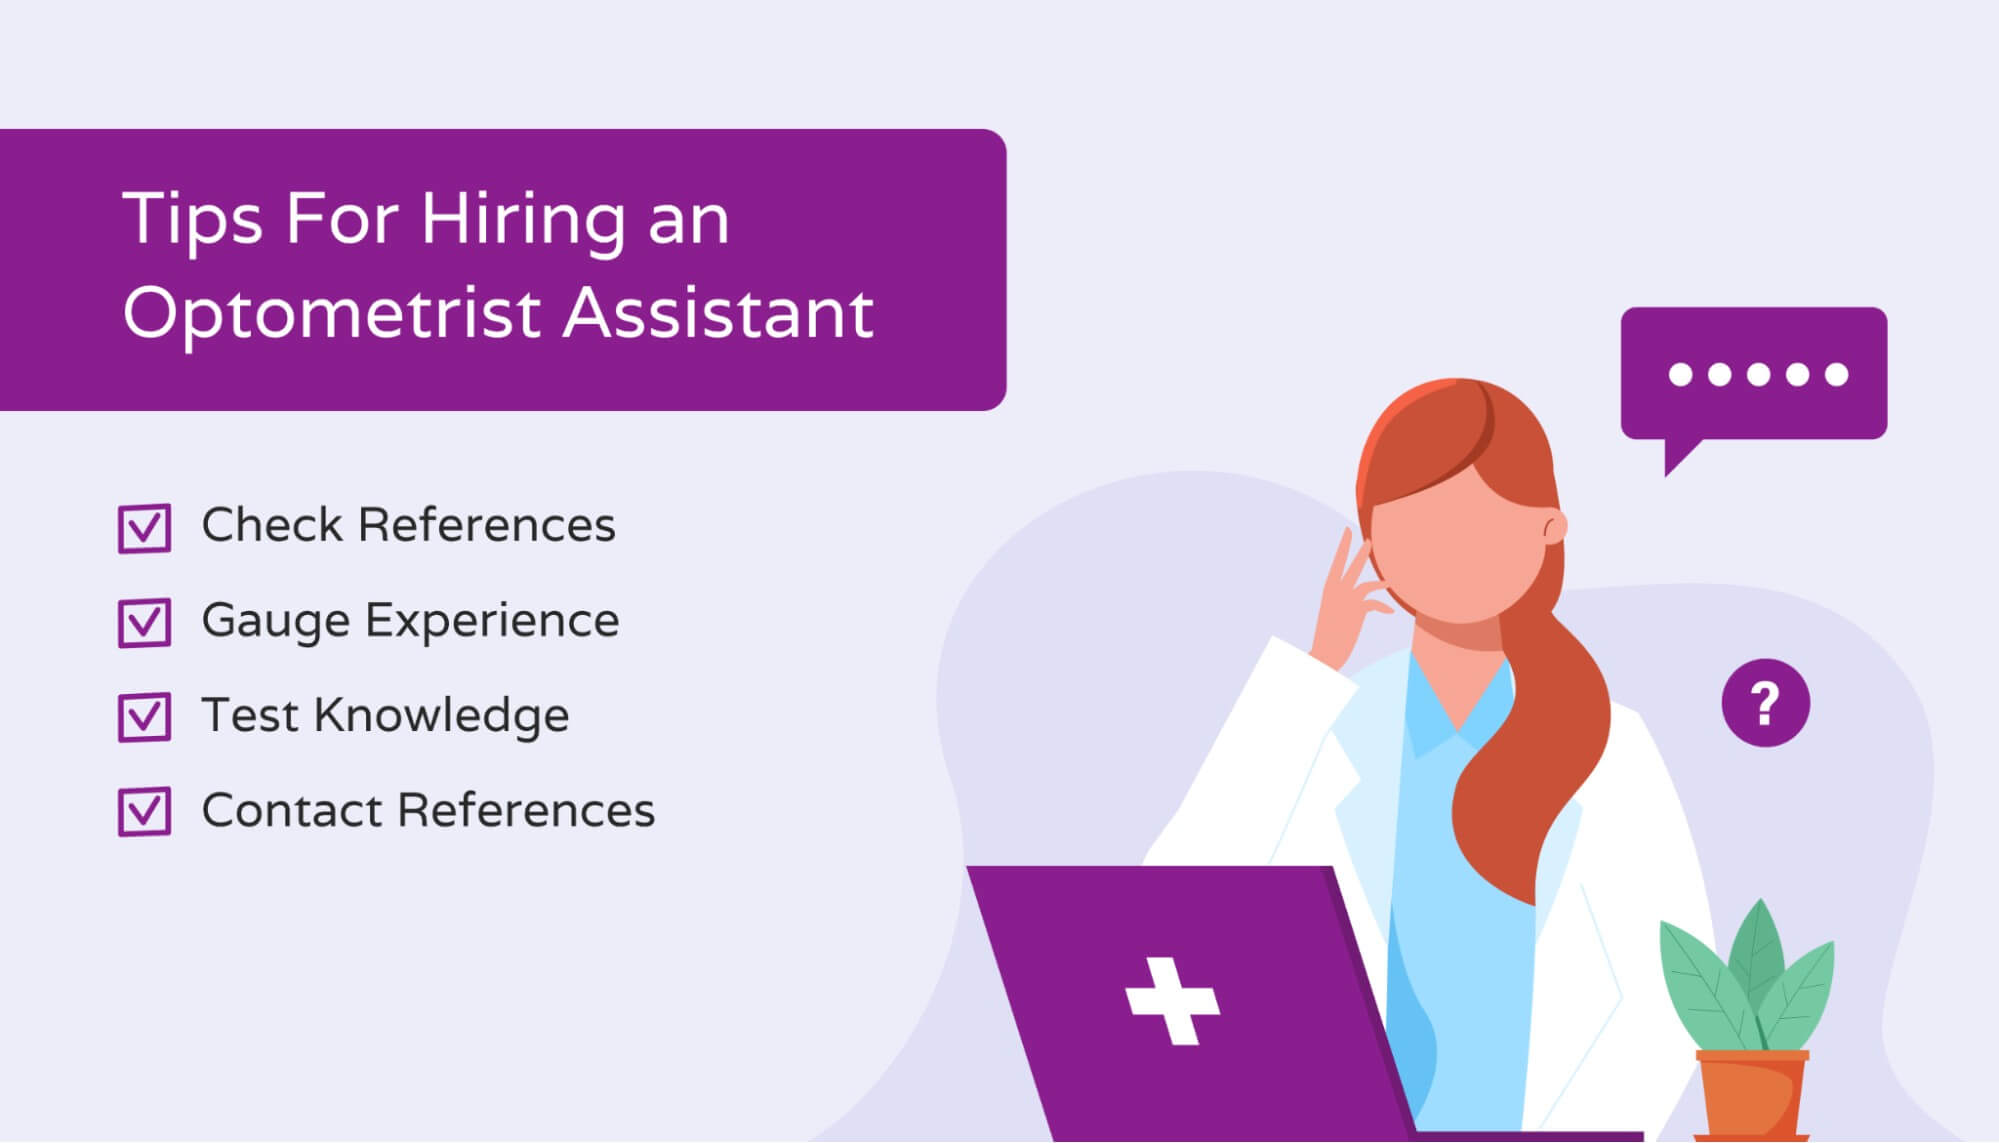 Tips for hiring an Optometrist Assistant. 